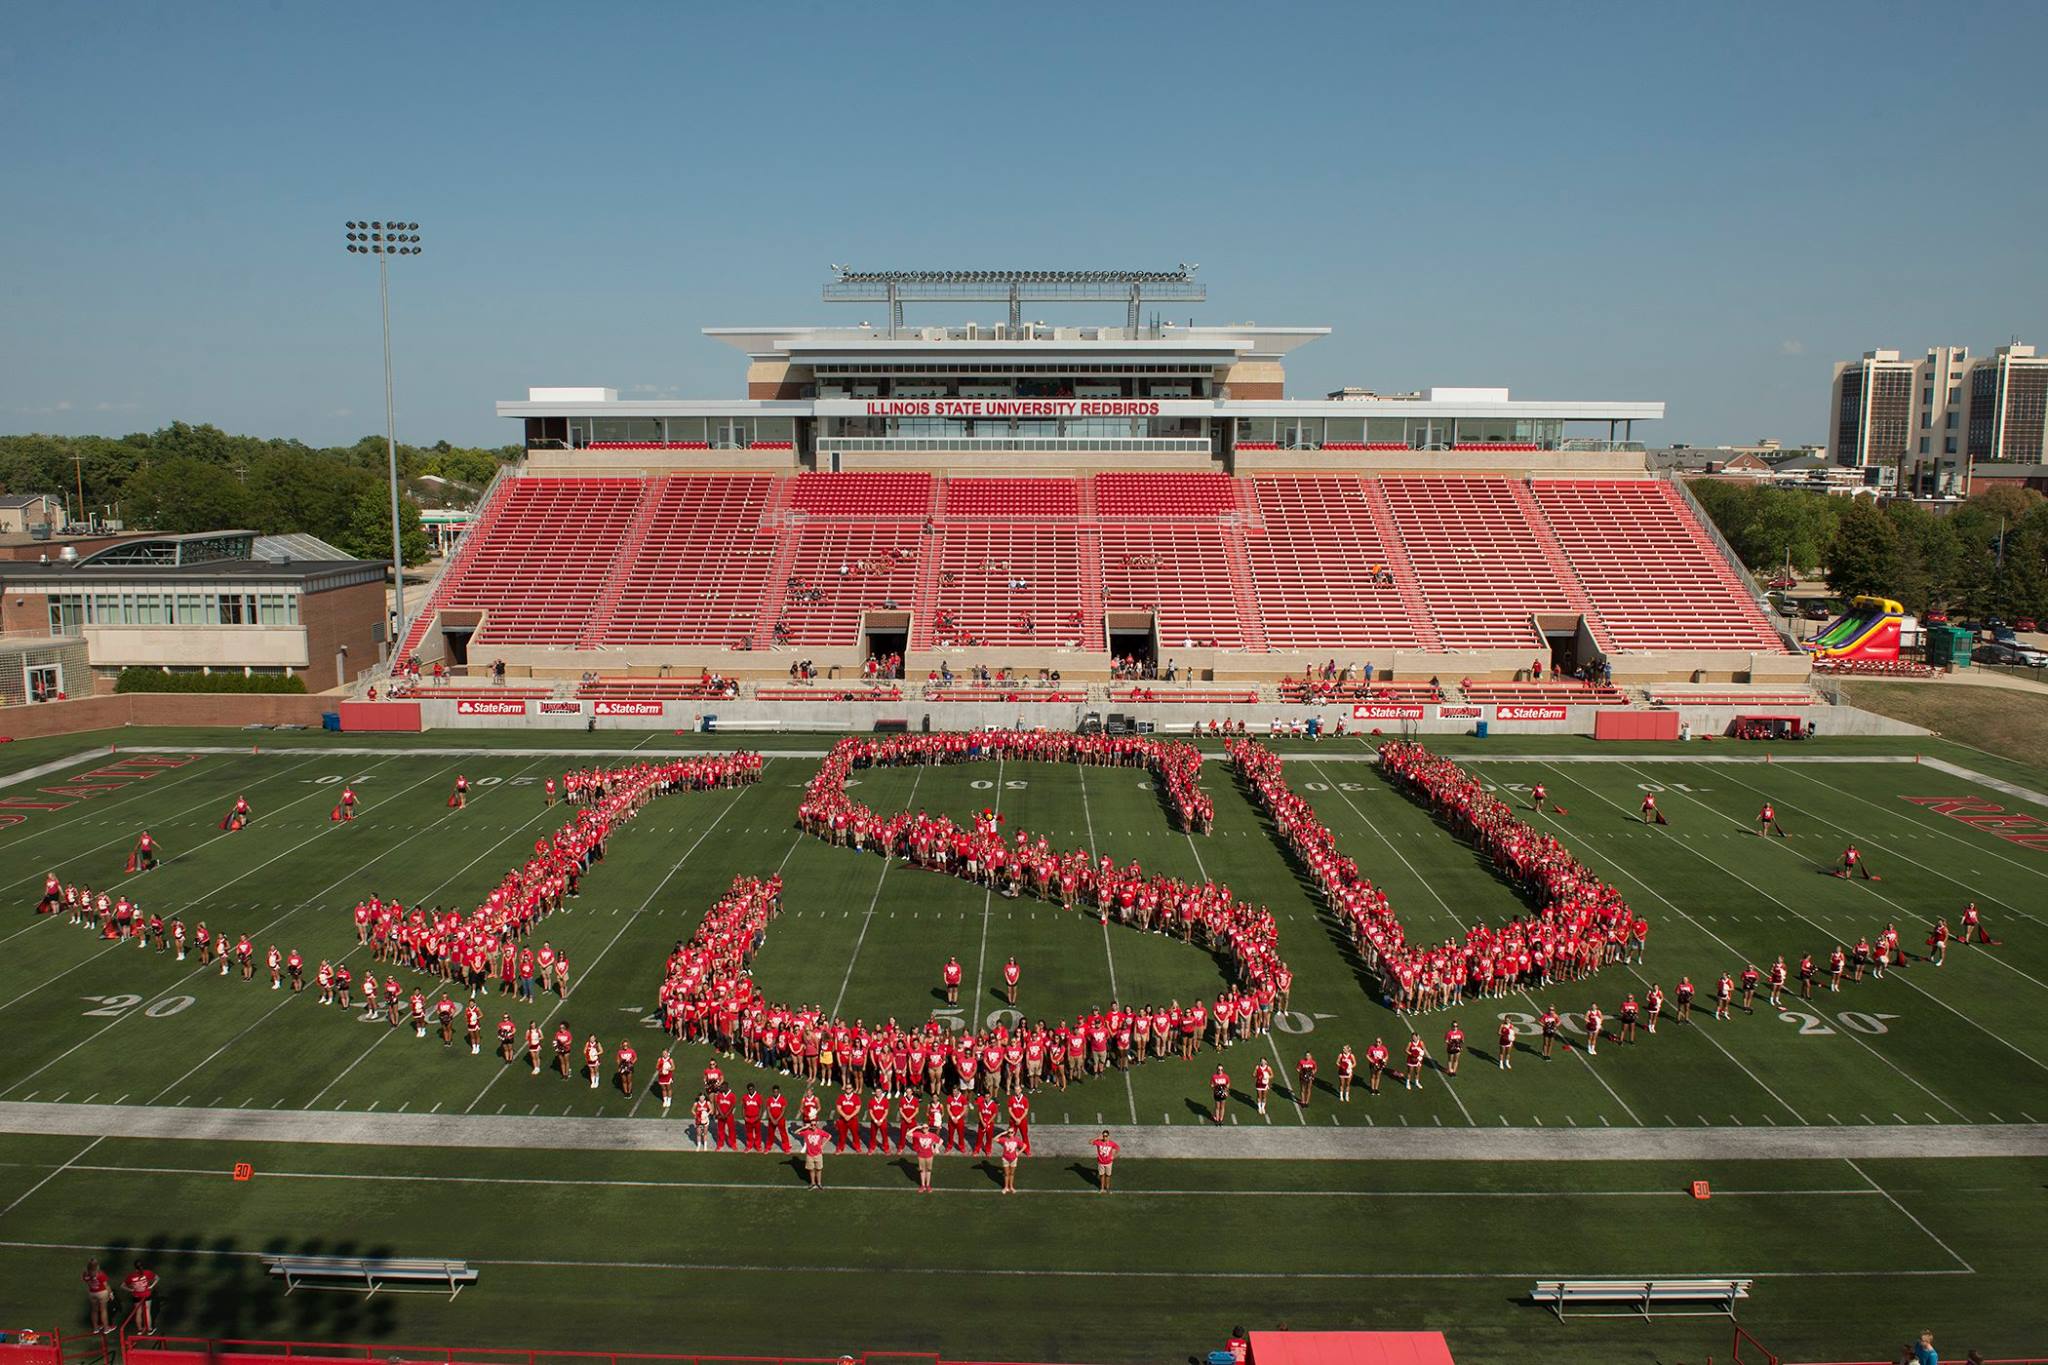 Students on football field wearing red shirts spelling out ISU